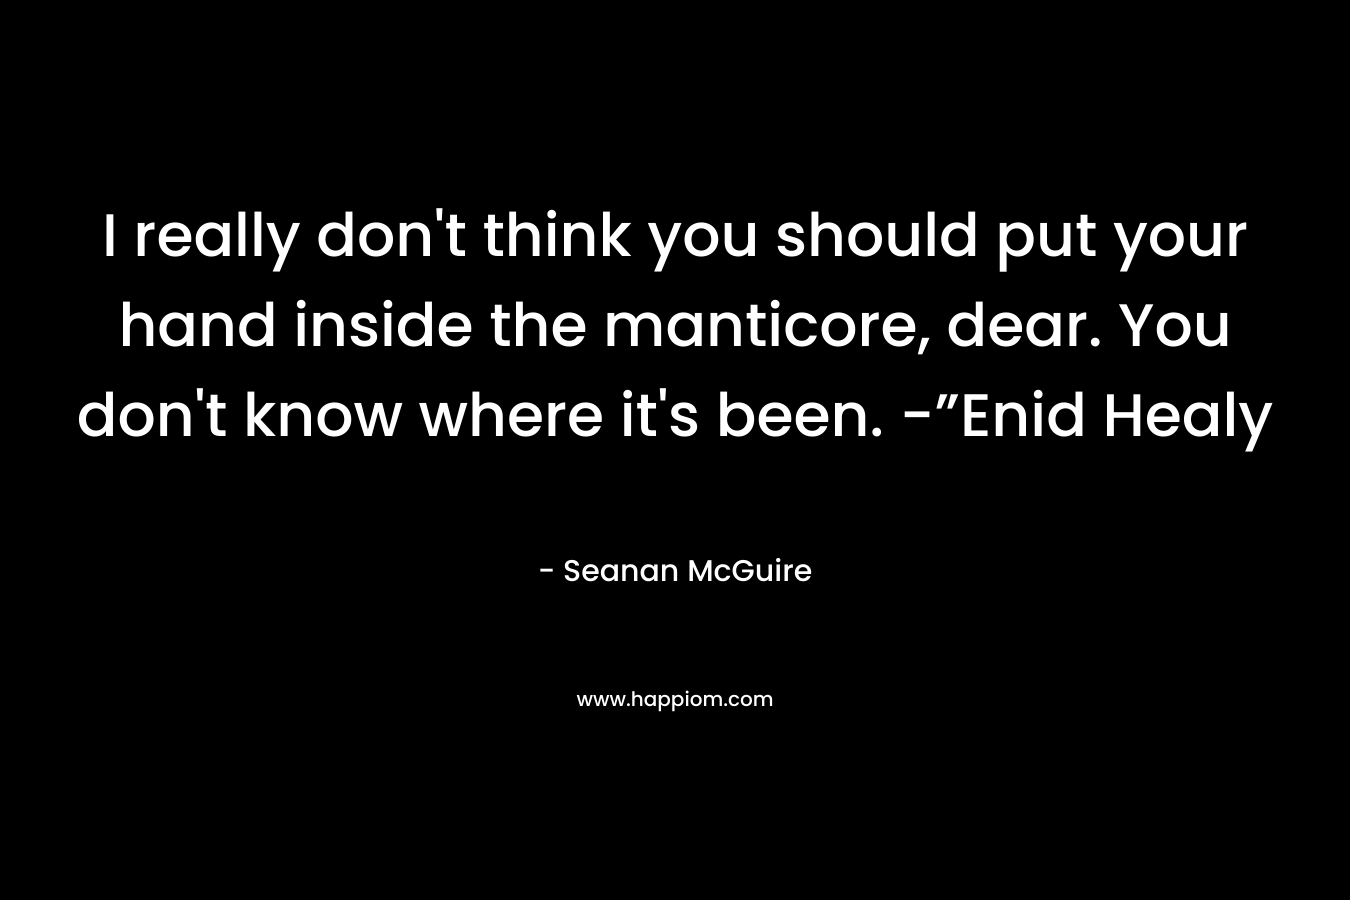 I really don't think you should put your hand inside the manticore, dear. You don't know where it's been. -”Enid Healy